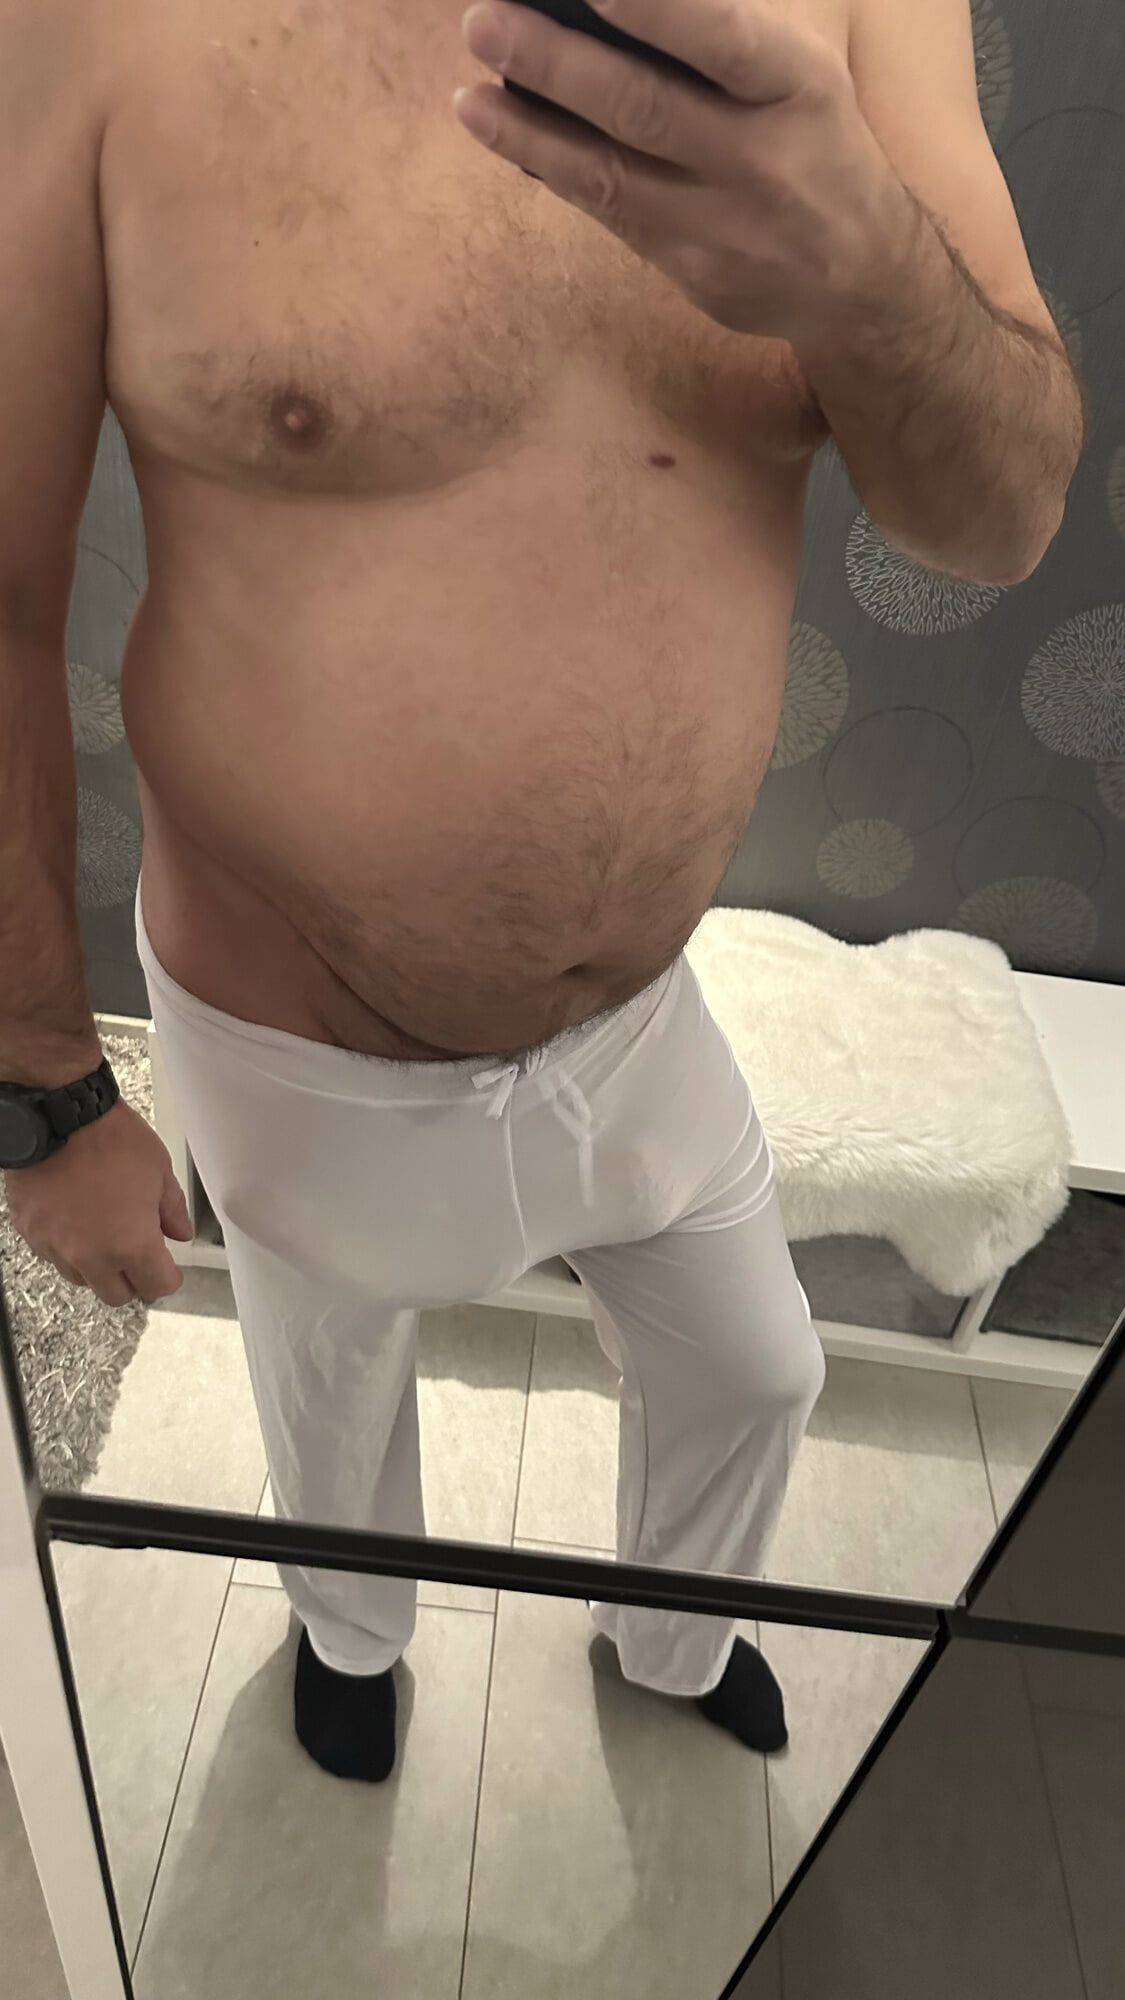 XXL Cock with Pants #8